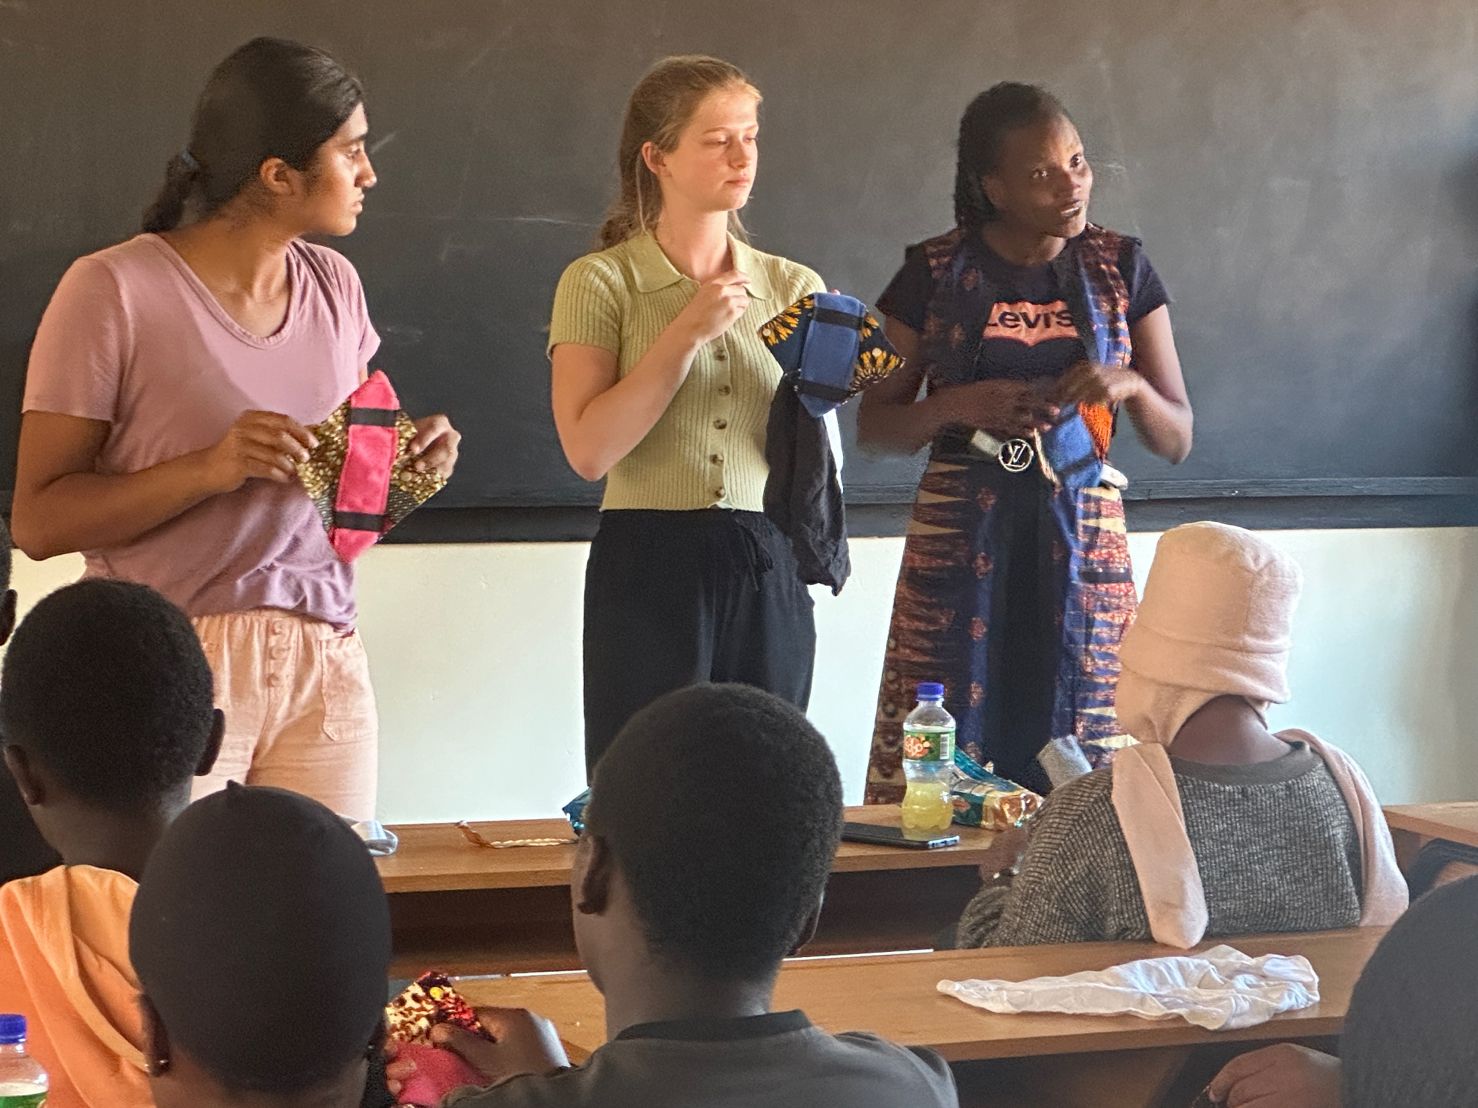 Pennington School students and representatives from Malawi discussing the menstrual product with students